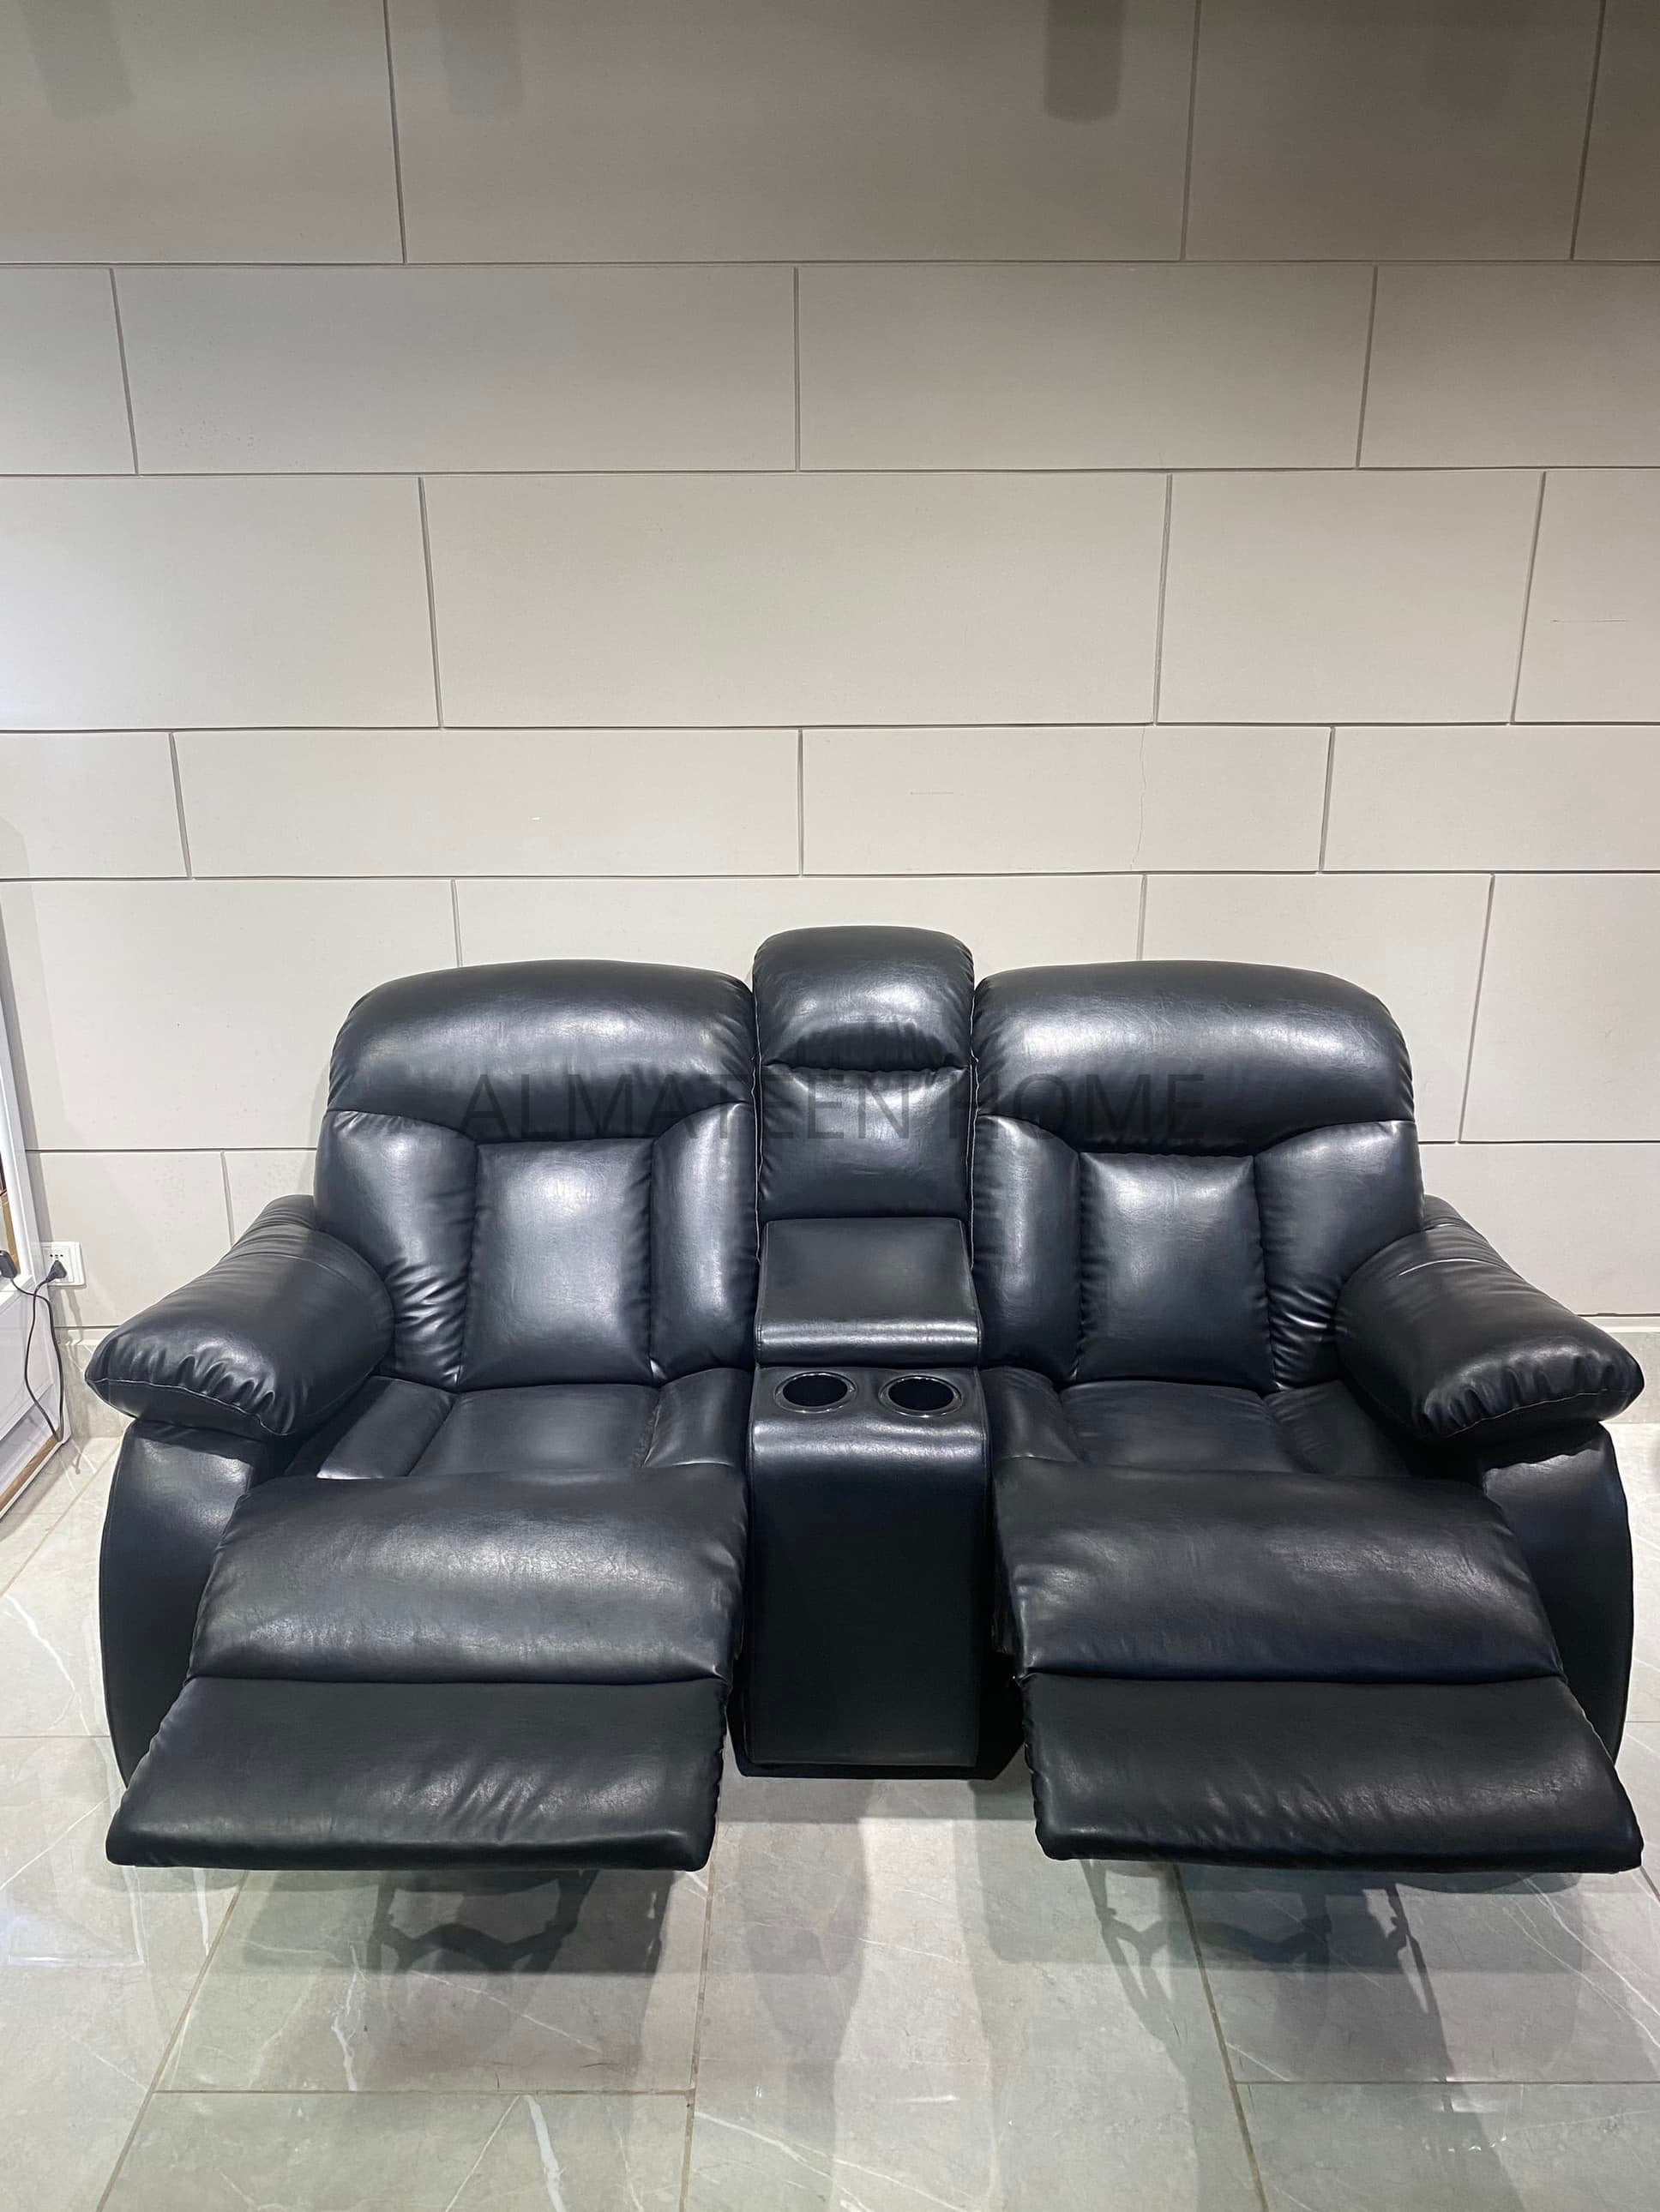 2 Seater Recliner Sofa With Cup Holders